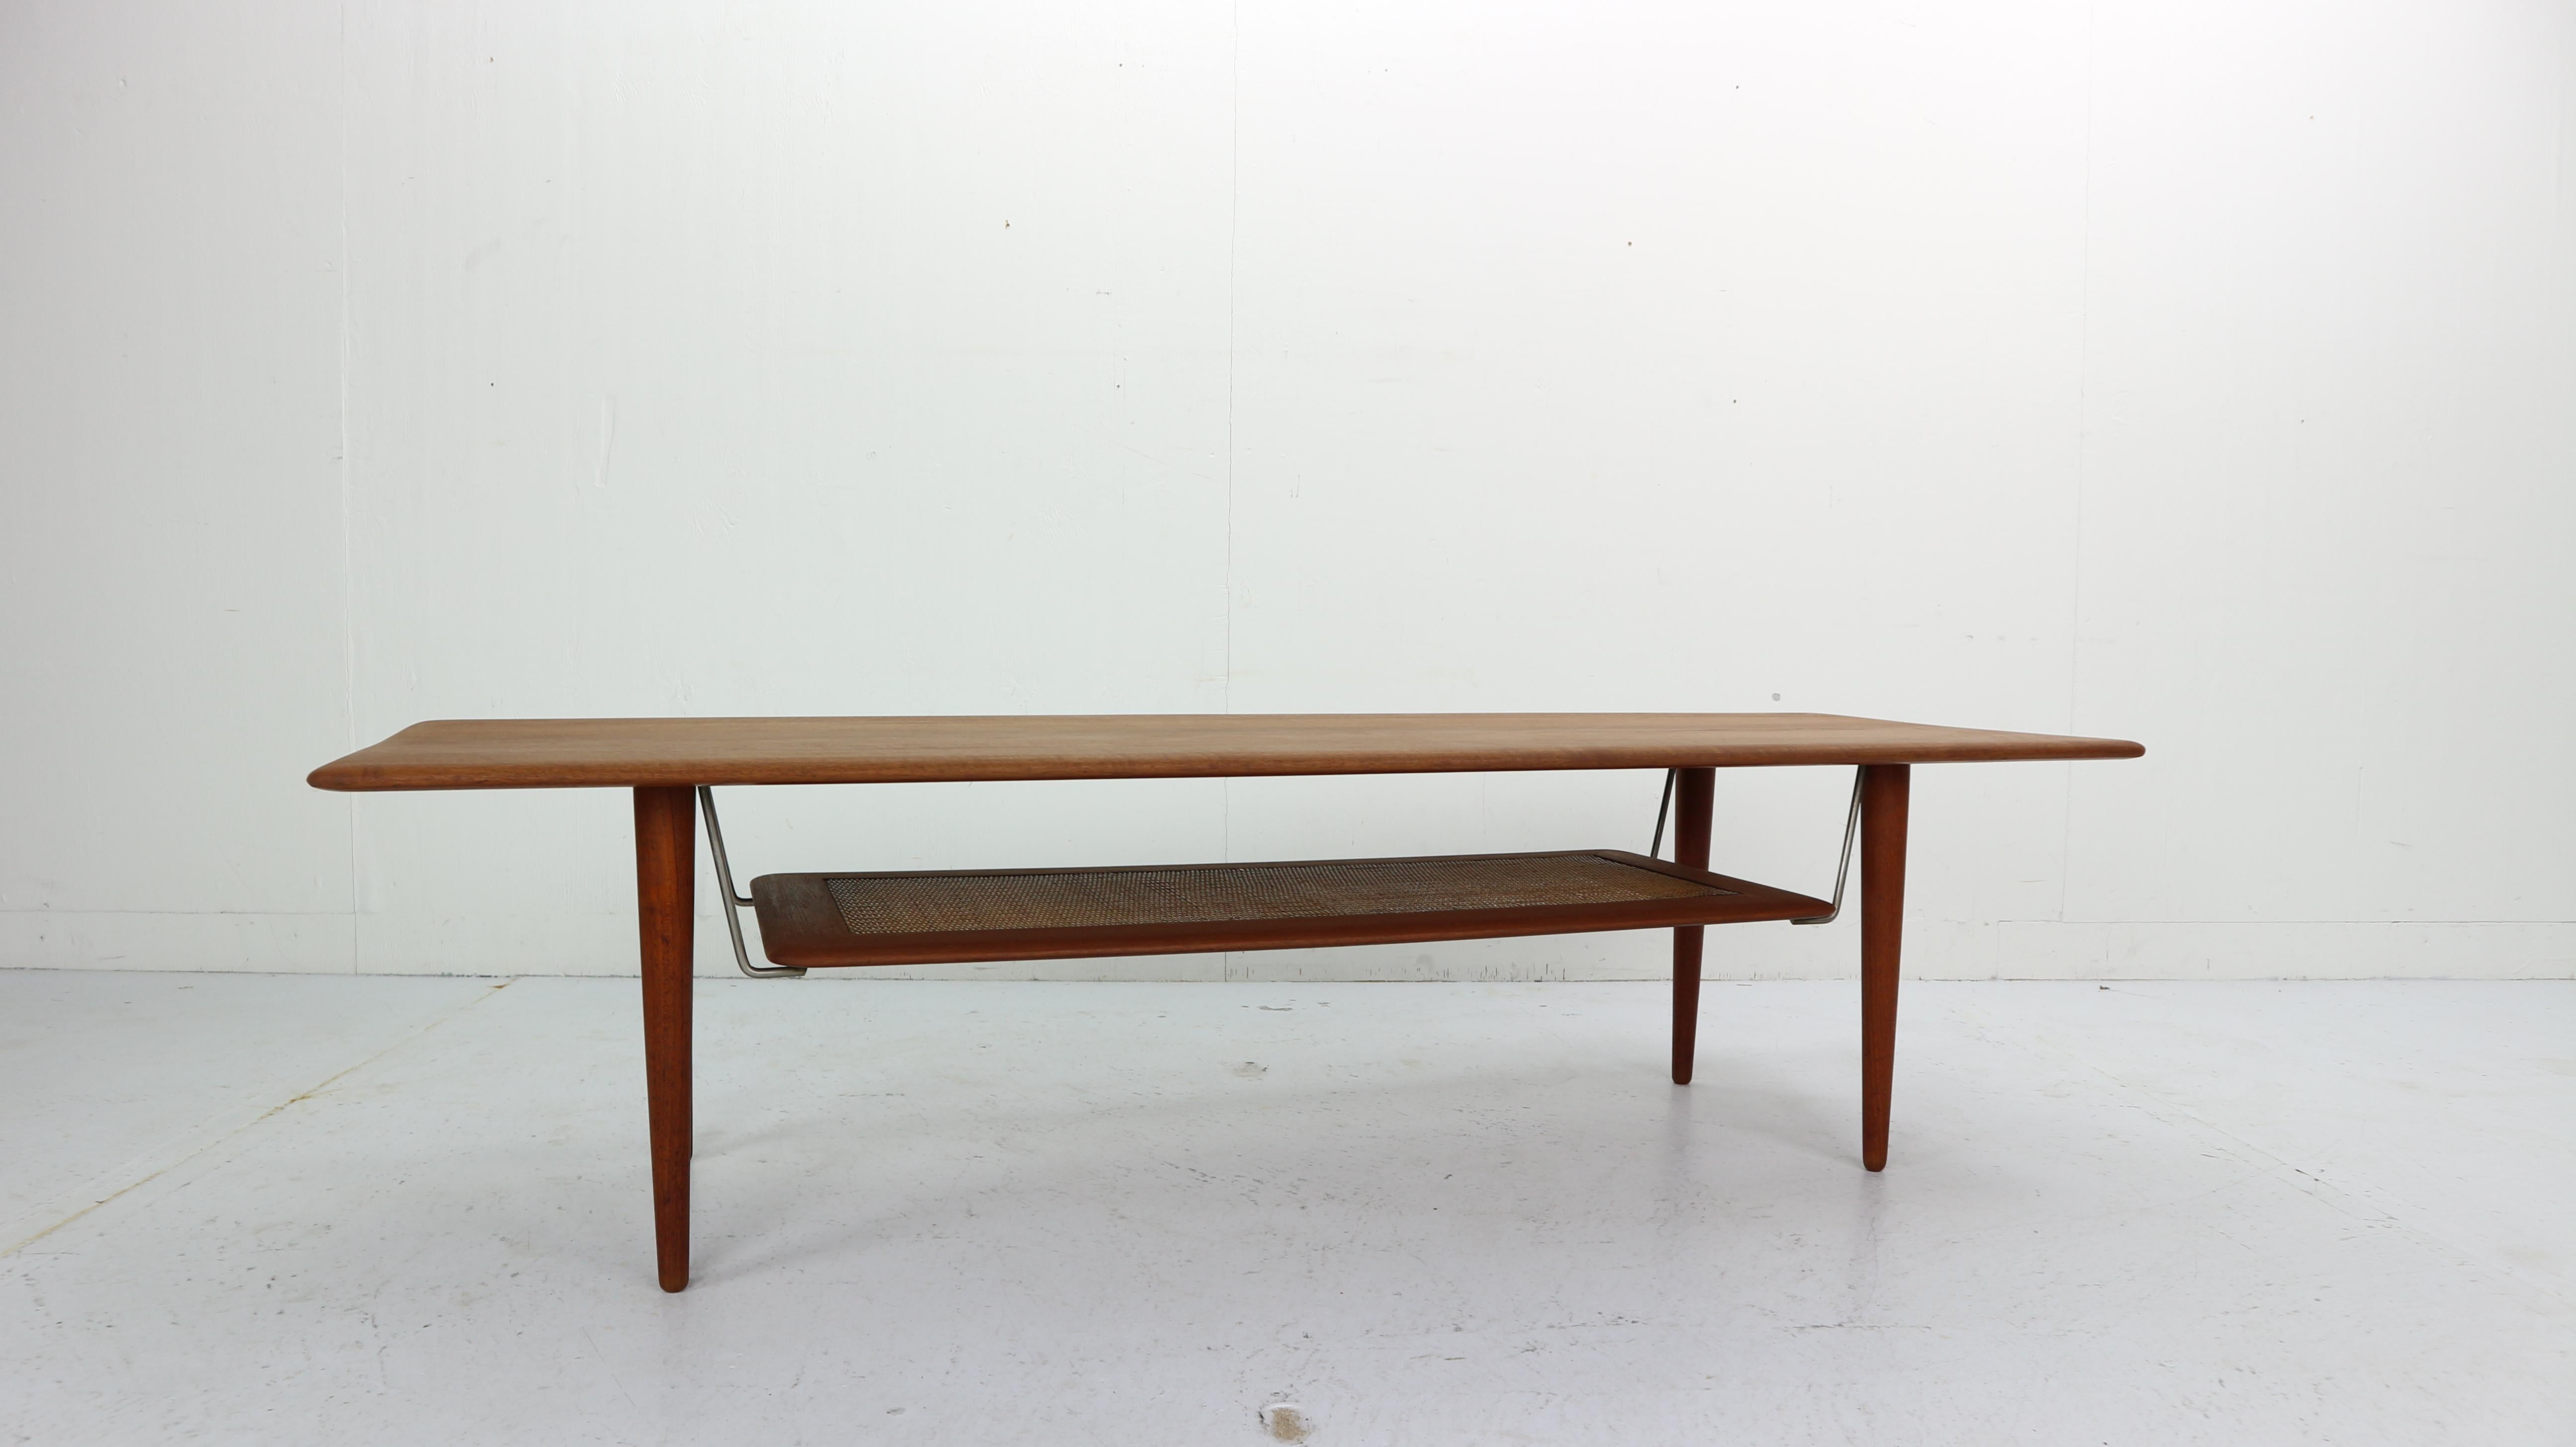 Model FD516 coffee table designed in 1956 by Peter Hvidt and Orla Mølgaard Nielsen for France and Daverkosen. Composed of a solid teak top / legs with a lower cane rack / shelf suspended by polished brass brackets. The solid teak top and tapered